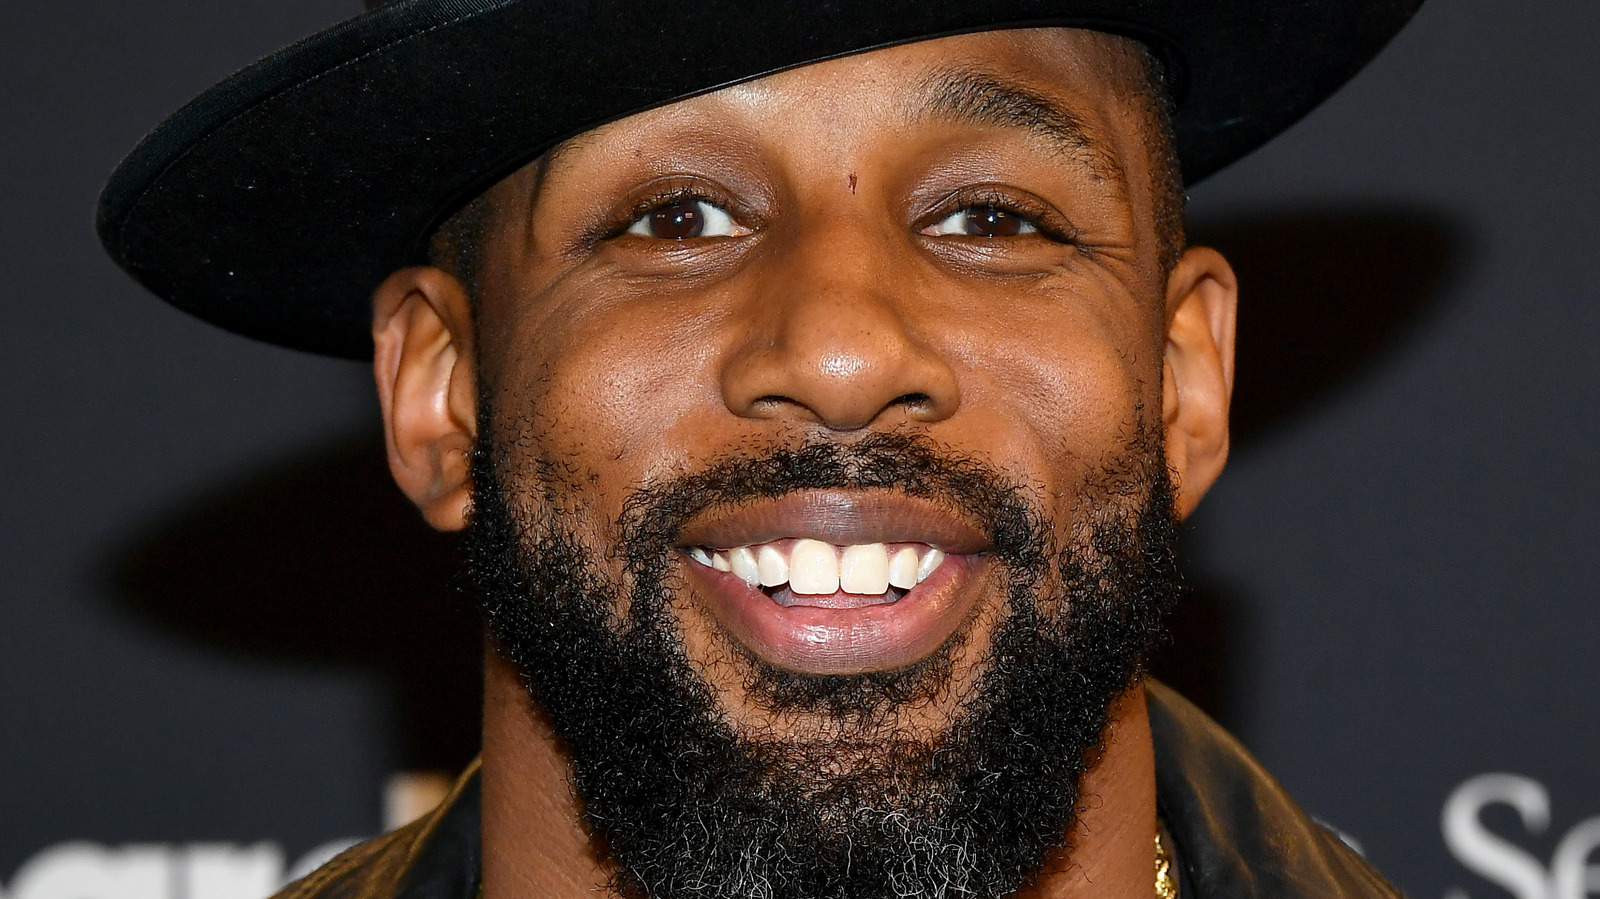 What You Don't Know About Stephen "tWitch" Boss